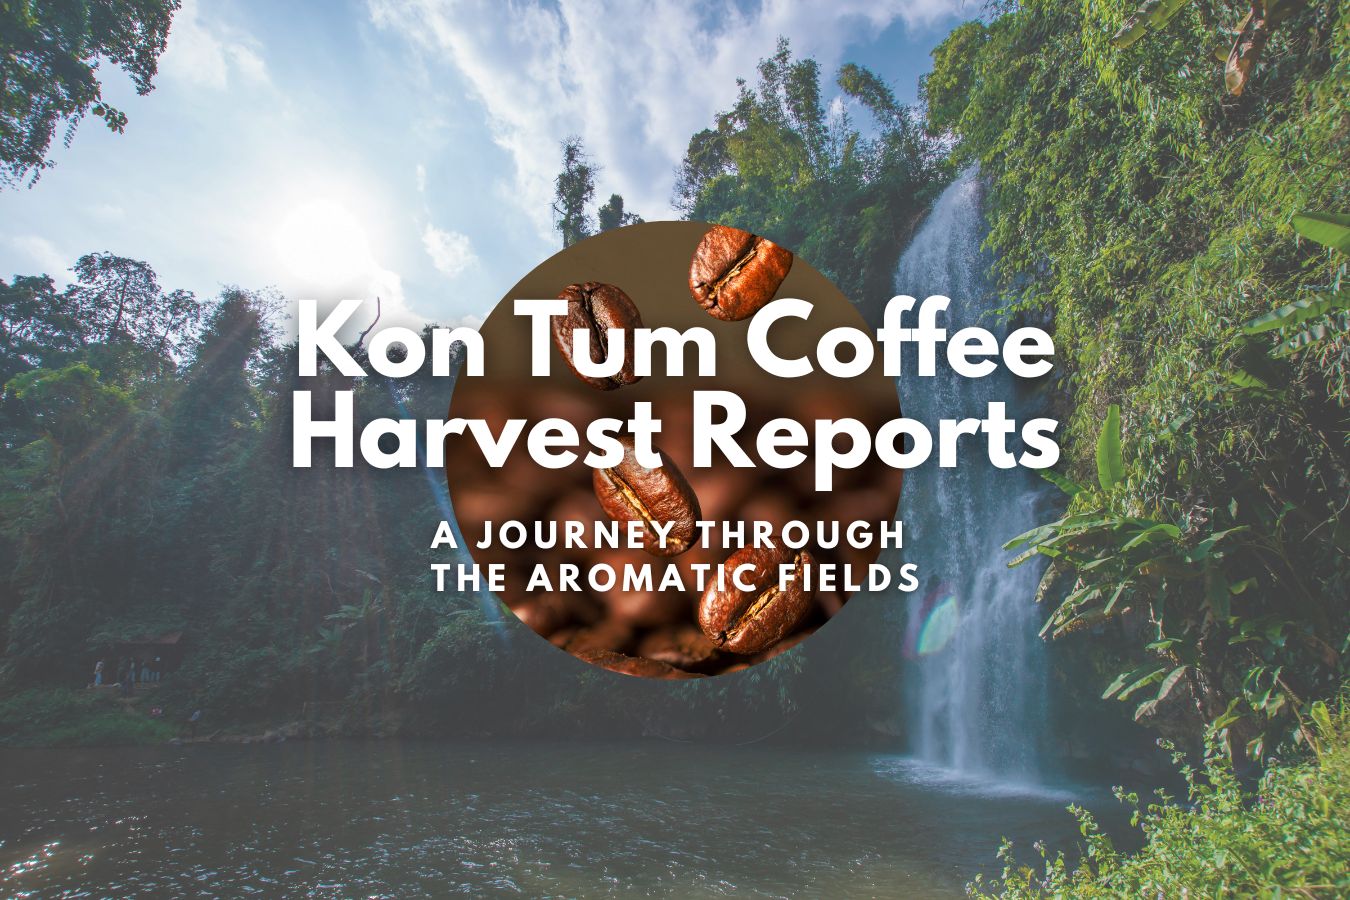 Kon Tum Coffee Harvest Reports: A Journey through the Aromatic Fields